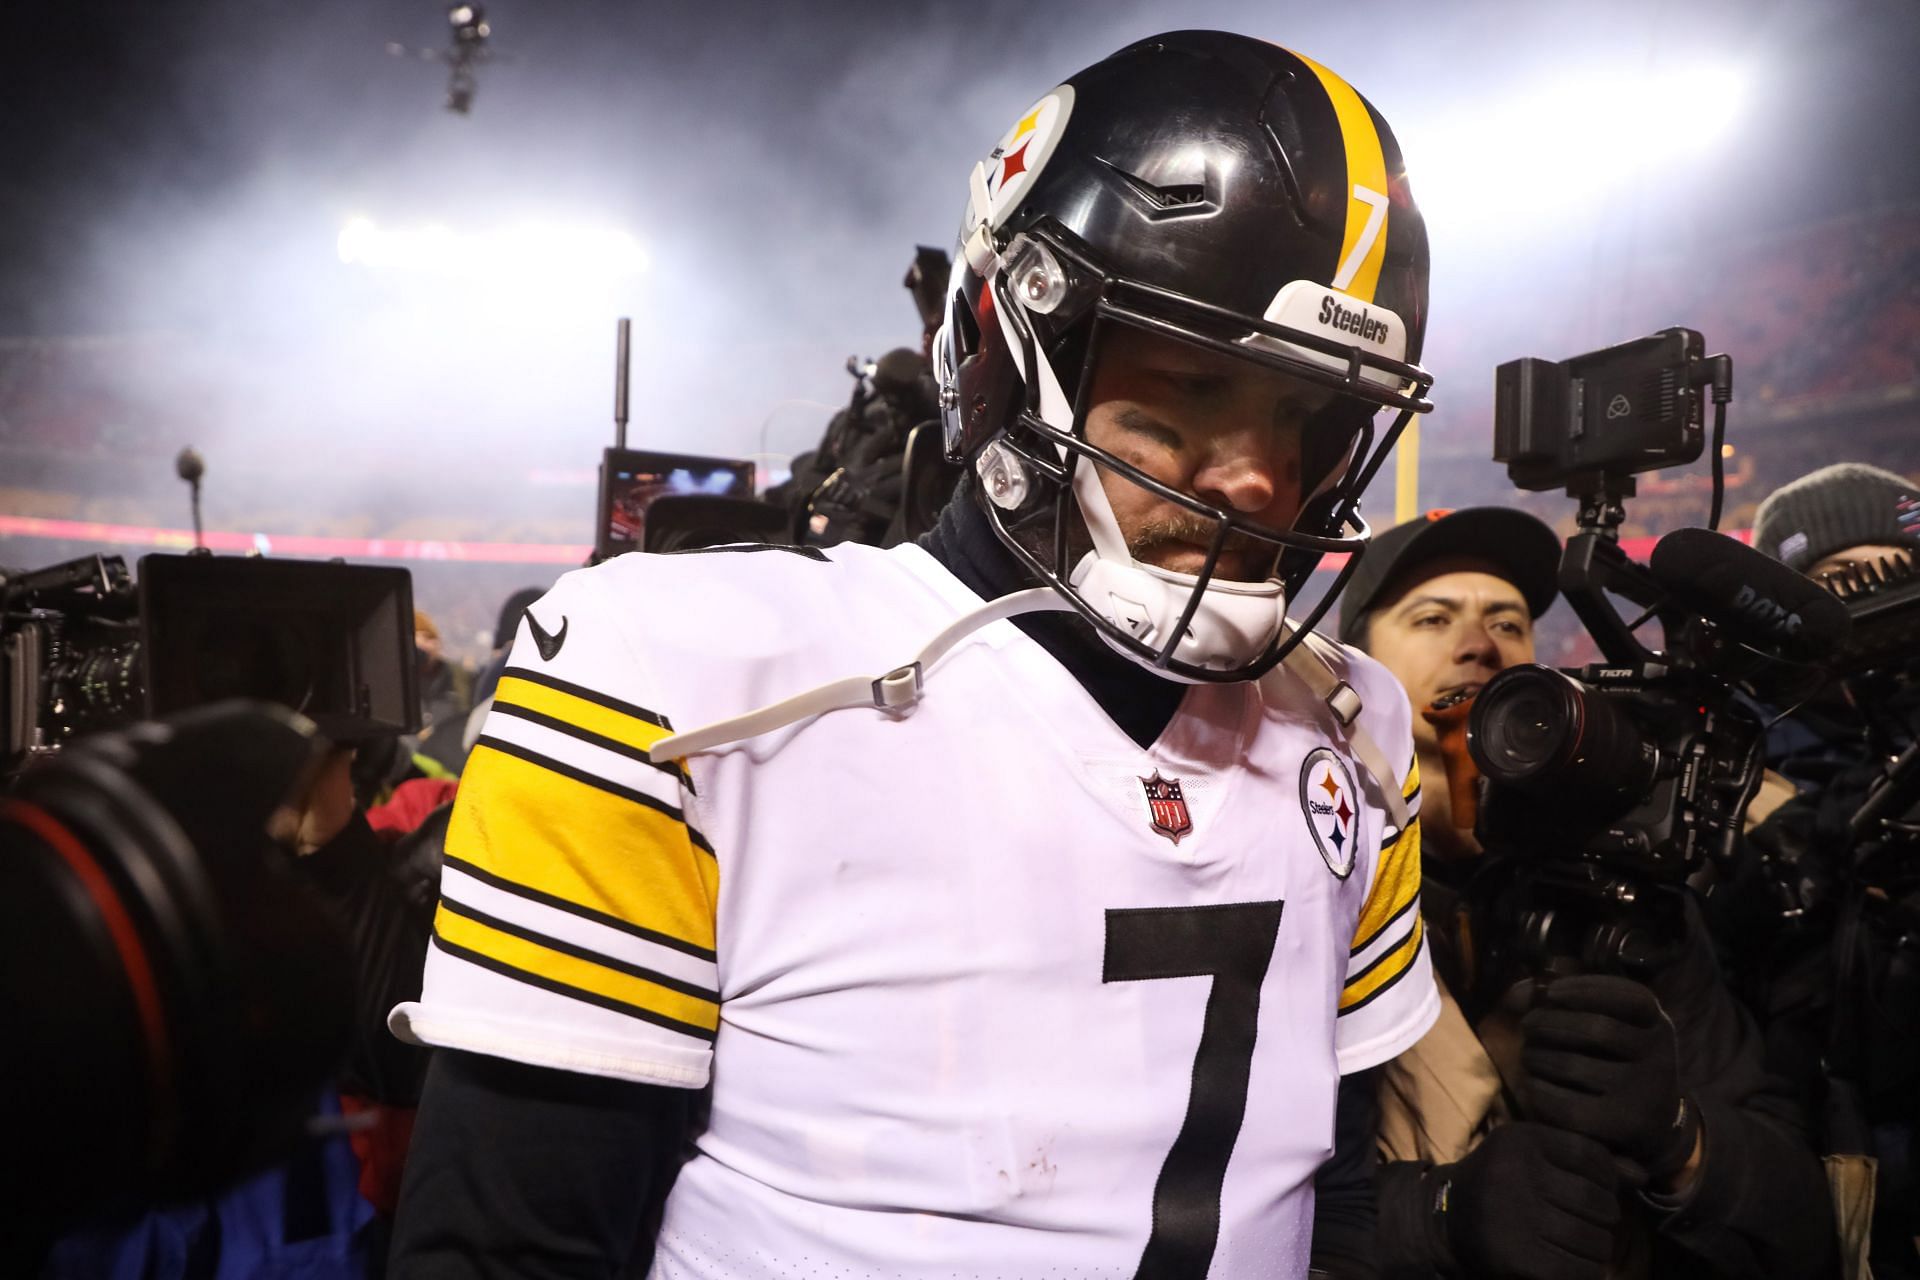 Big Ben walking off the field for the last time after a playoff loss to the Chiefs